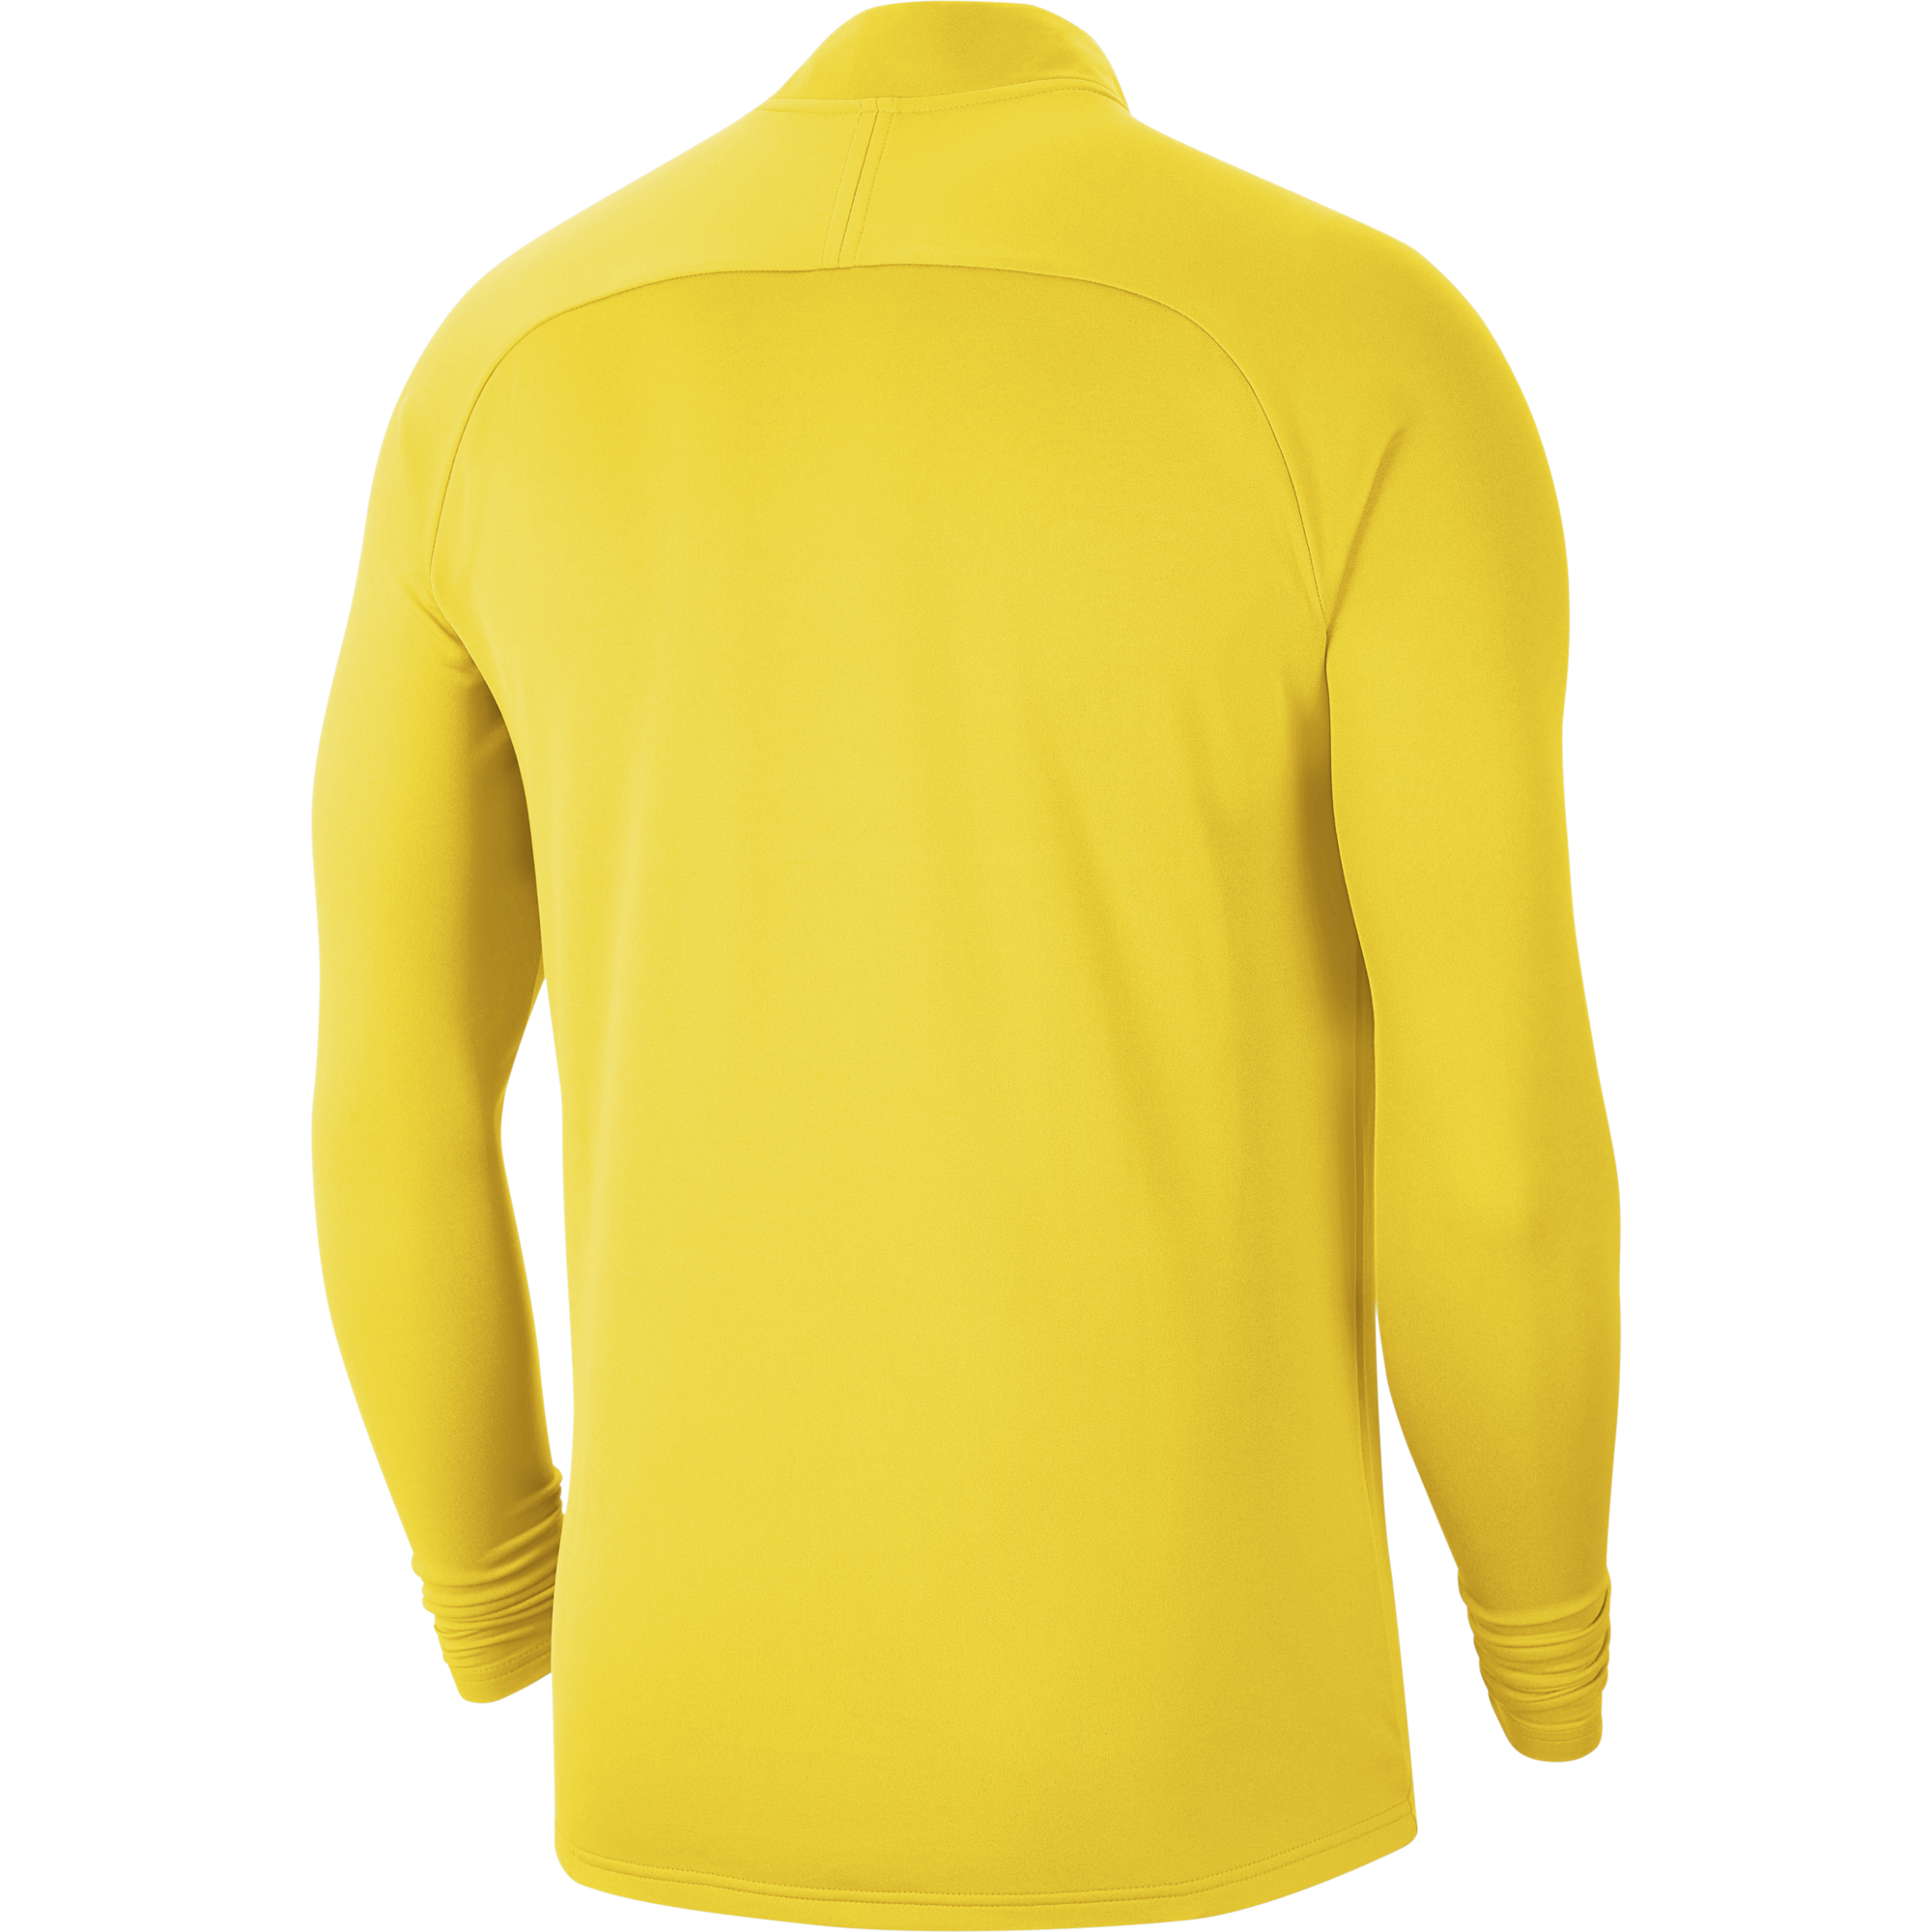 Academy 21 Drill Top (Youth)